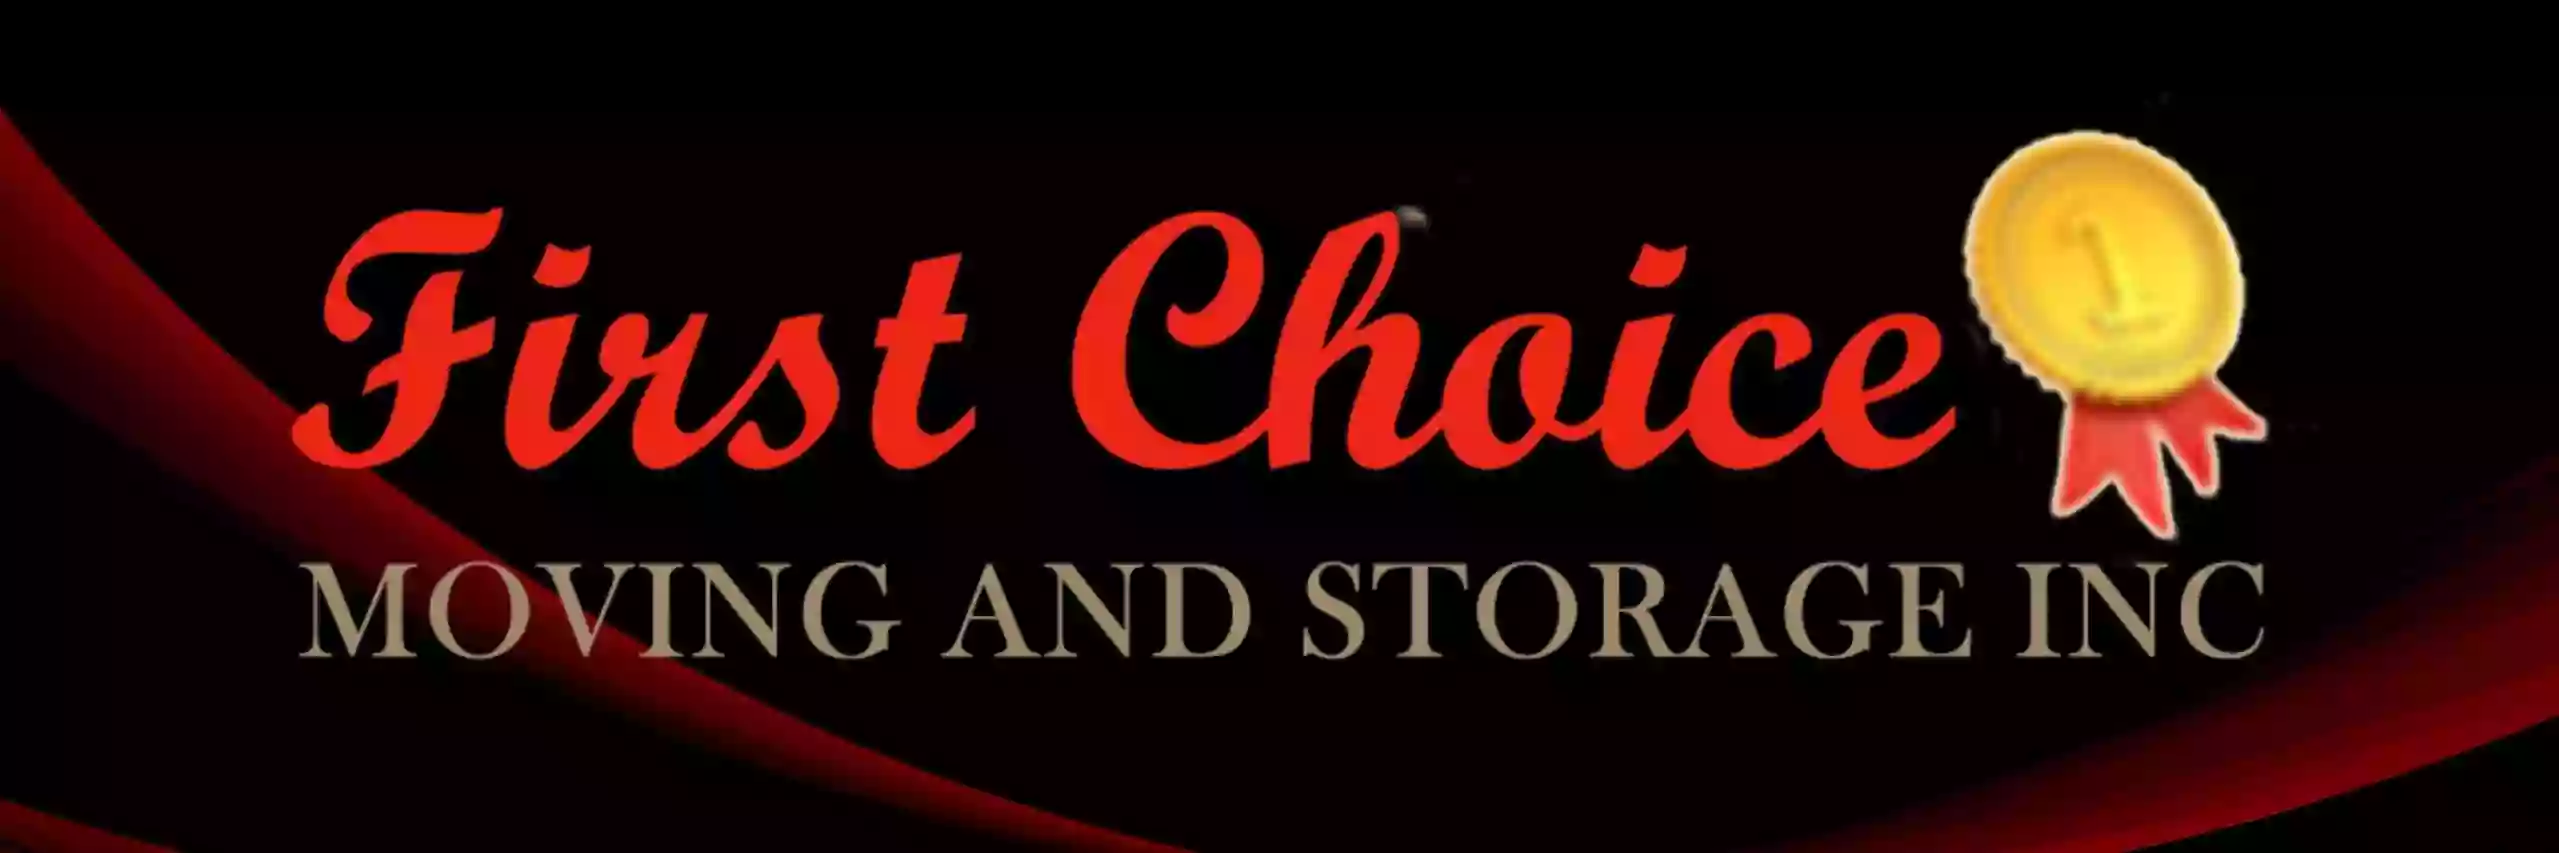 First Choice Moving & Storage